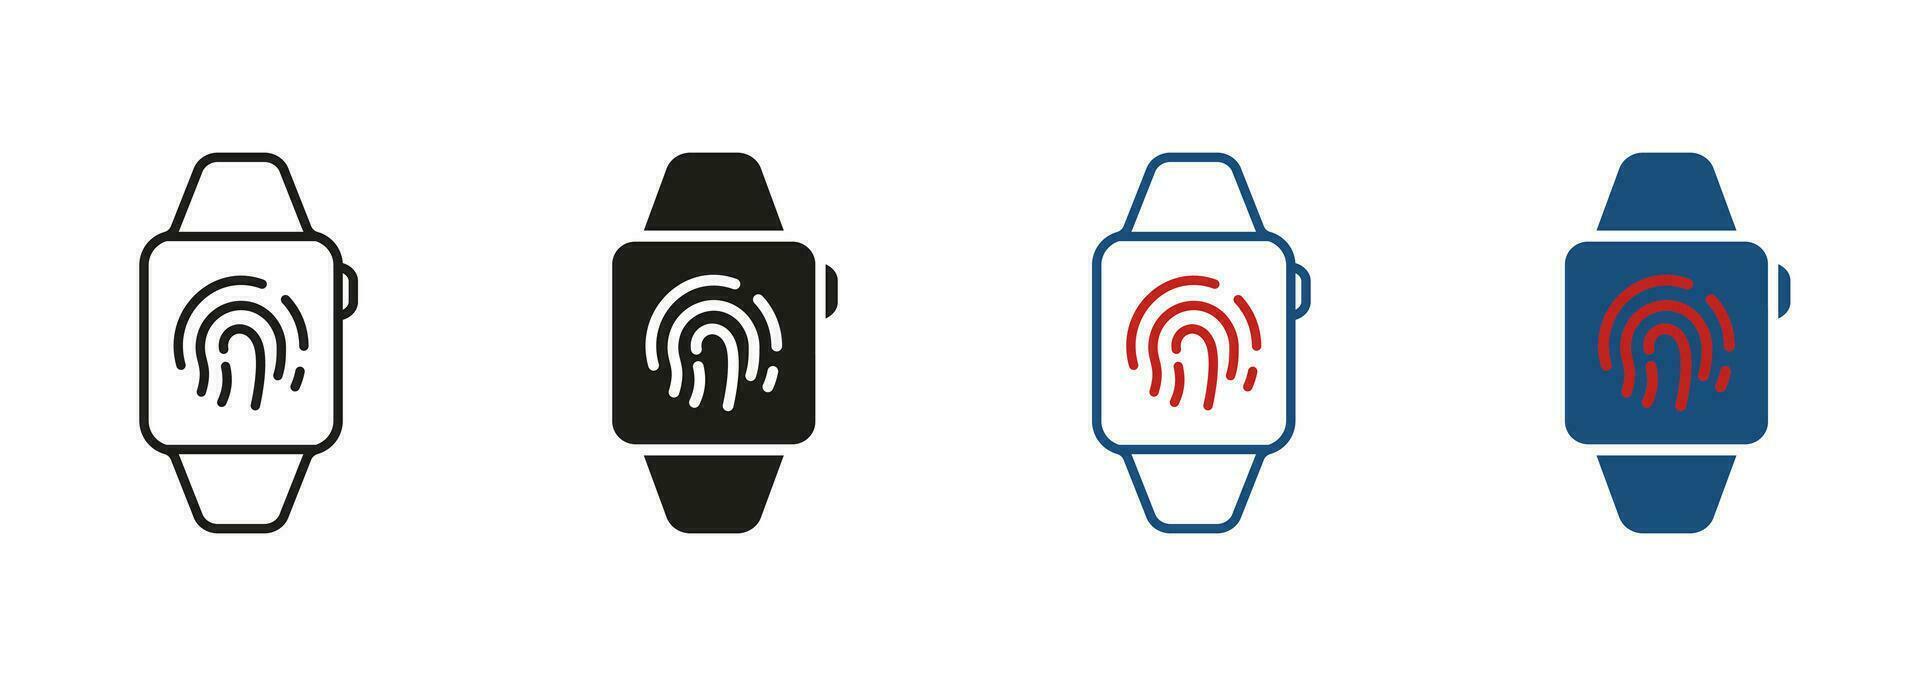 Biometric Identification Pictogram. Smart Watch with Fingerprint. Touch ID Technology in Smartwatch Line and Silhouette Icon Set. Security Touchscreen Symbol Collection. Isolated Vector Illustration.